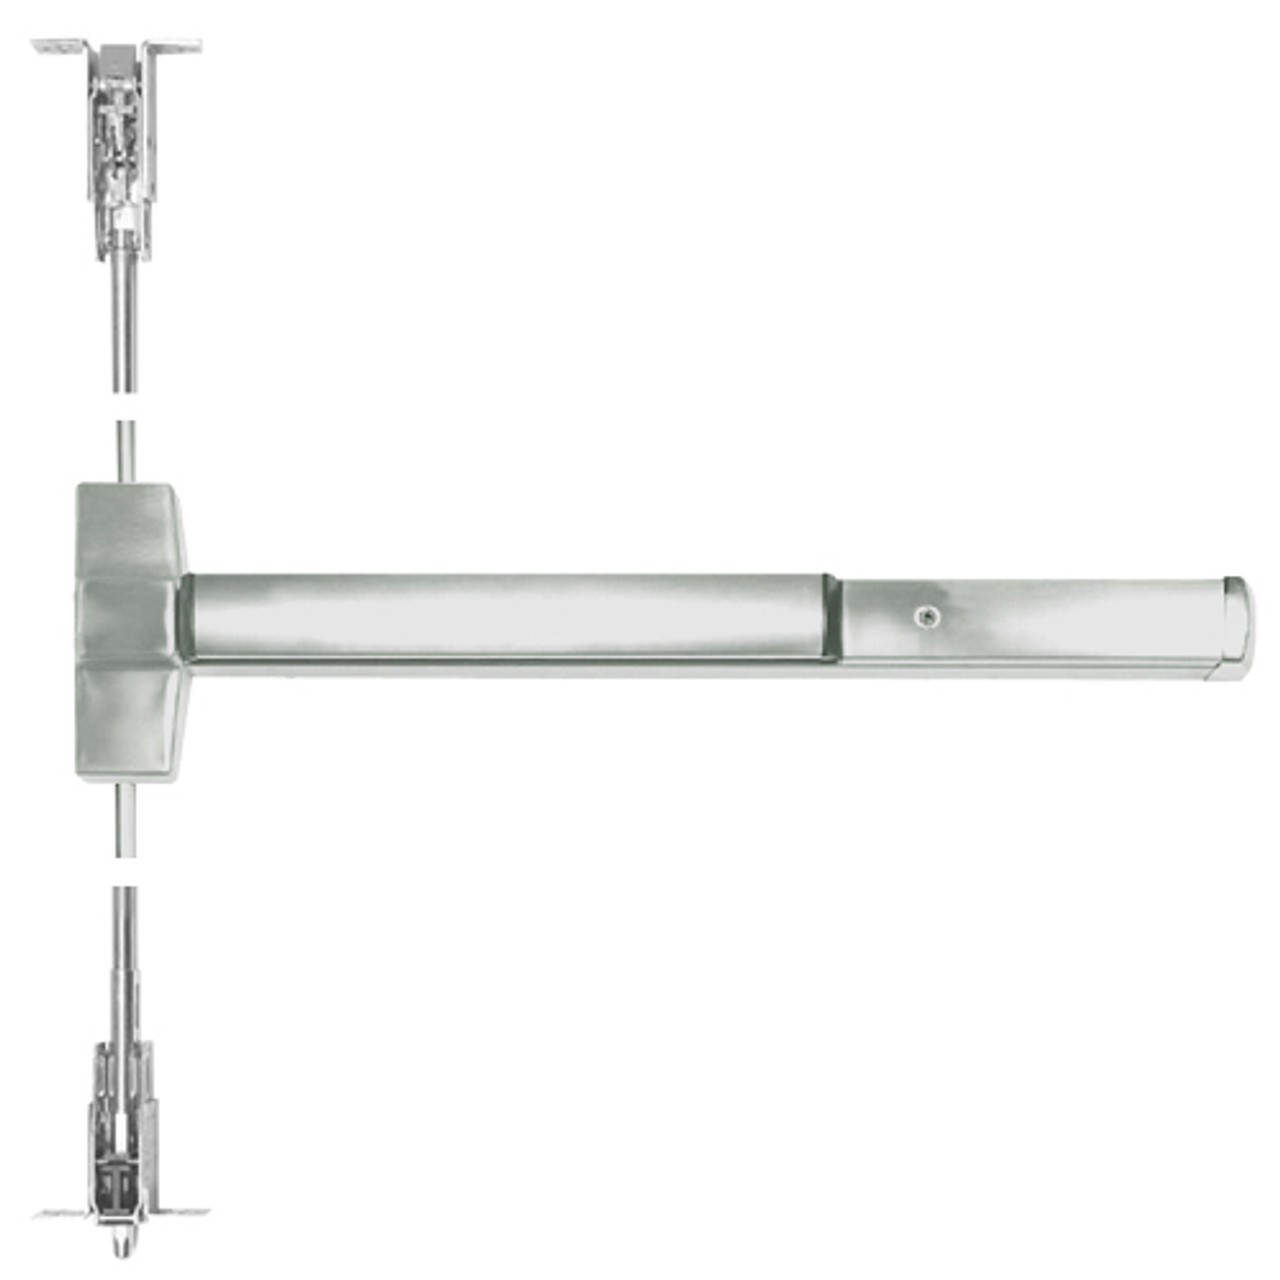 ED5800-619-M92 Corbin ED5800 Series Non Fire Rated Concealed Vertical Rod Device with Touchbar Monitoring in Satin Nickel Finish